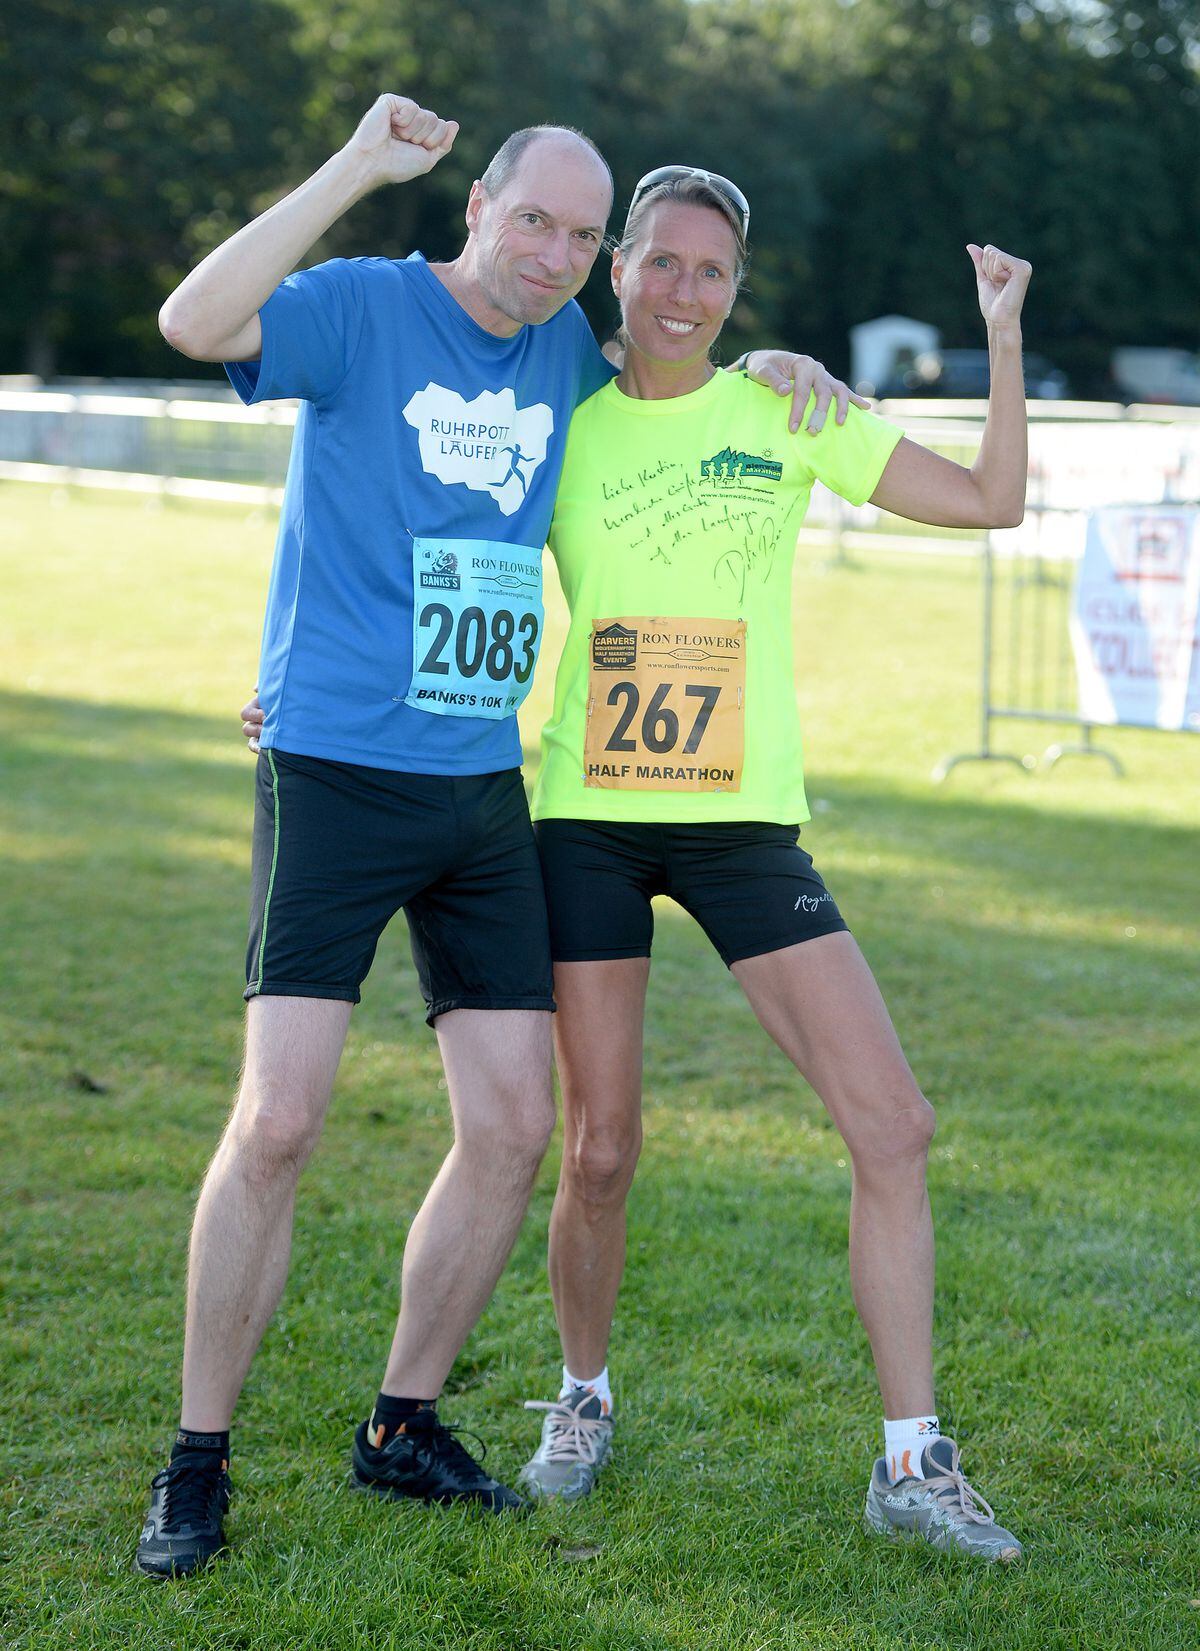 Rainer and Kerstin Henkel who travelled all the way from Essen in Germany just for the half marathon